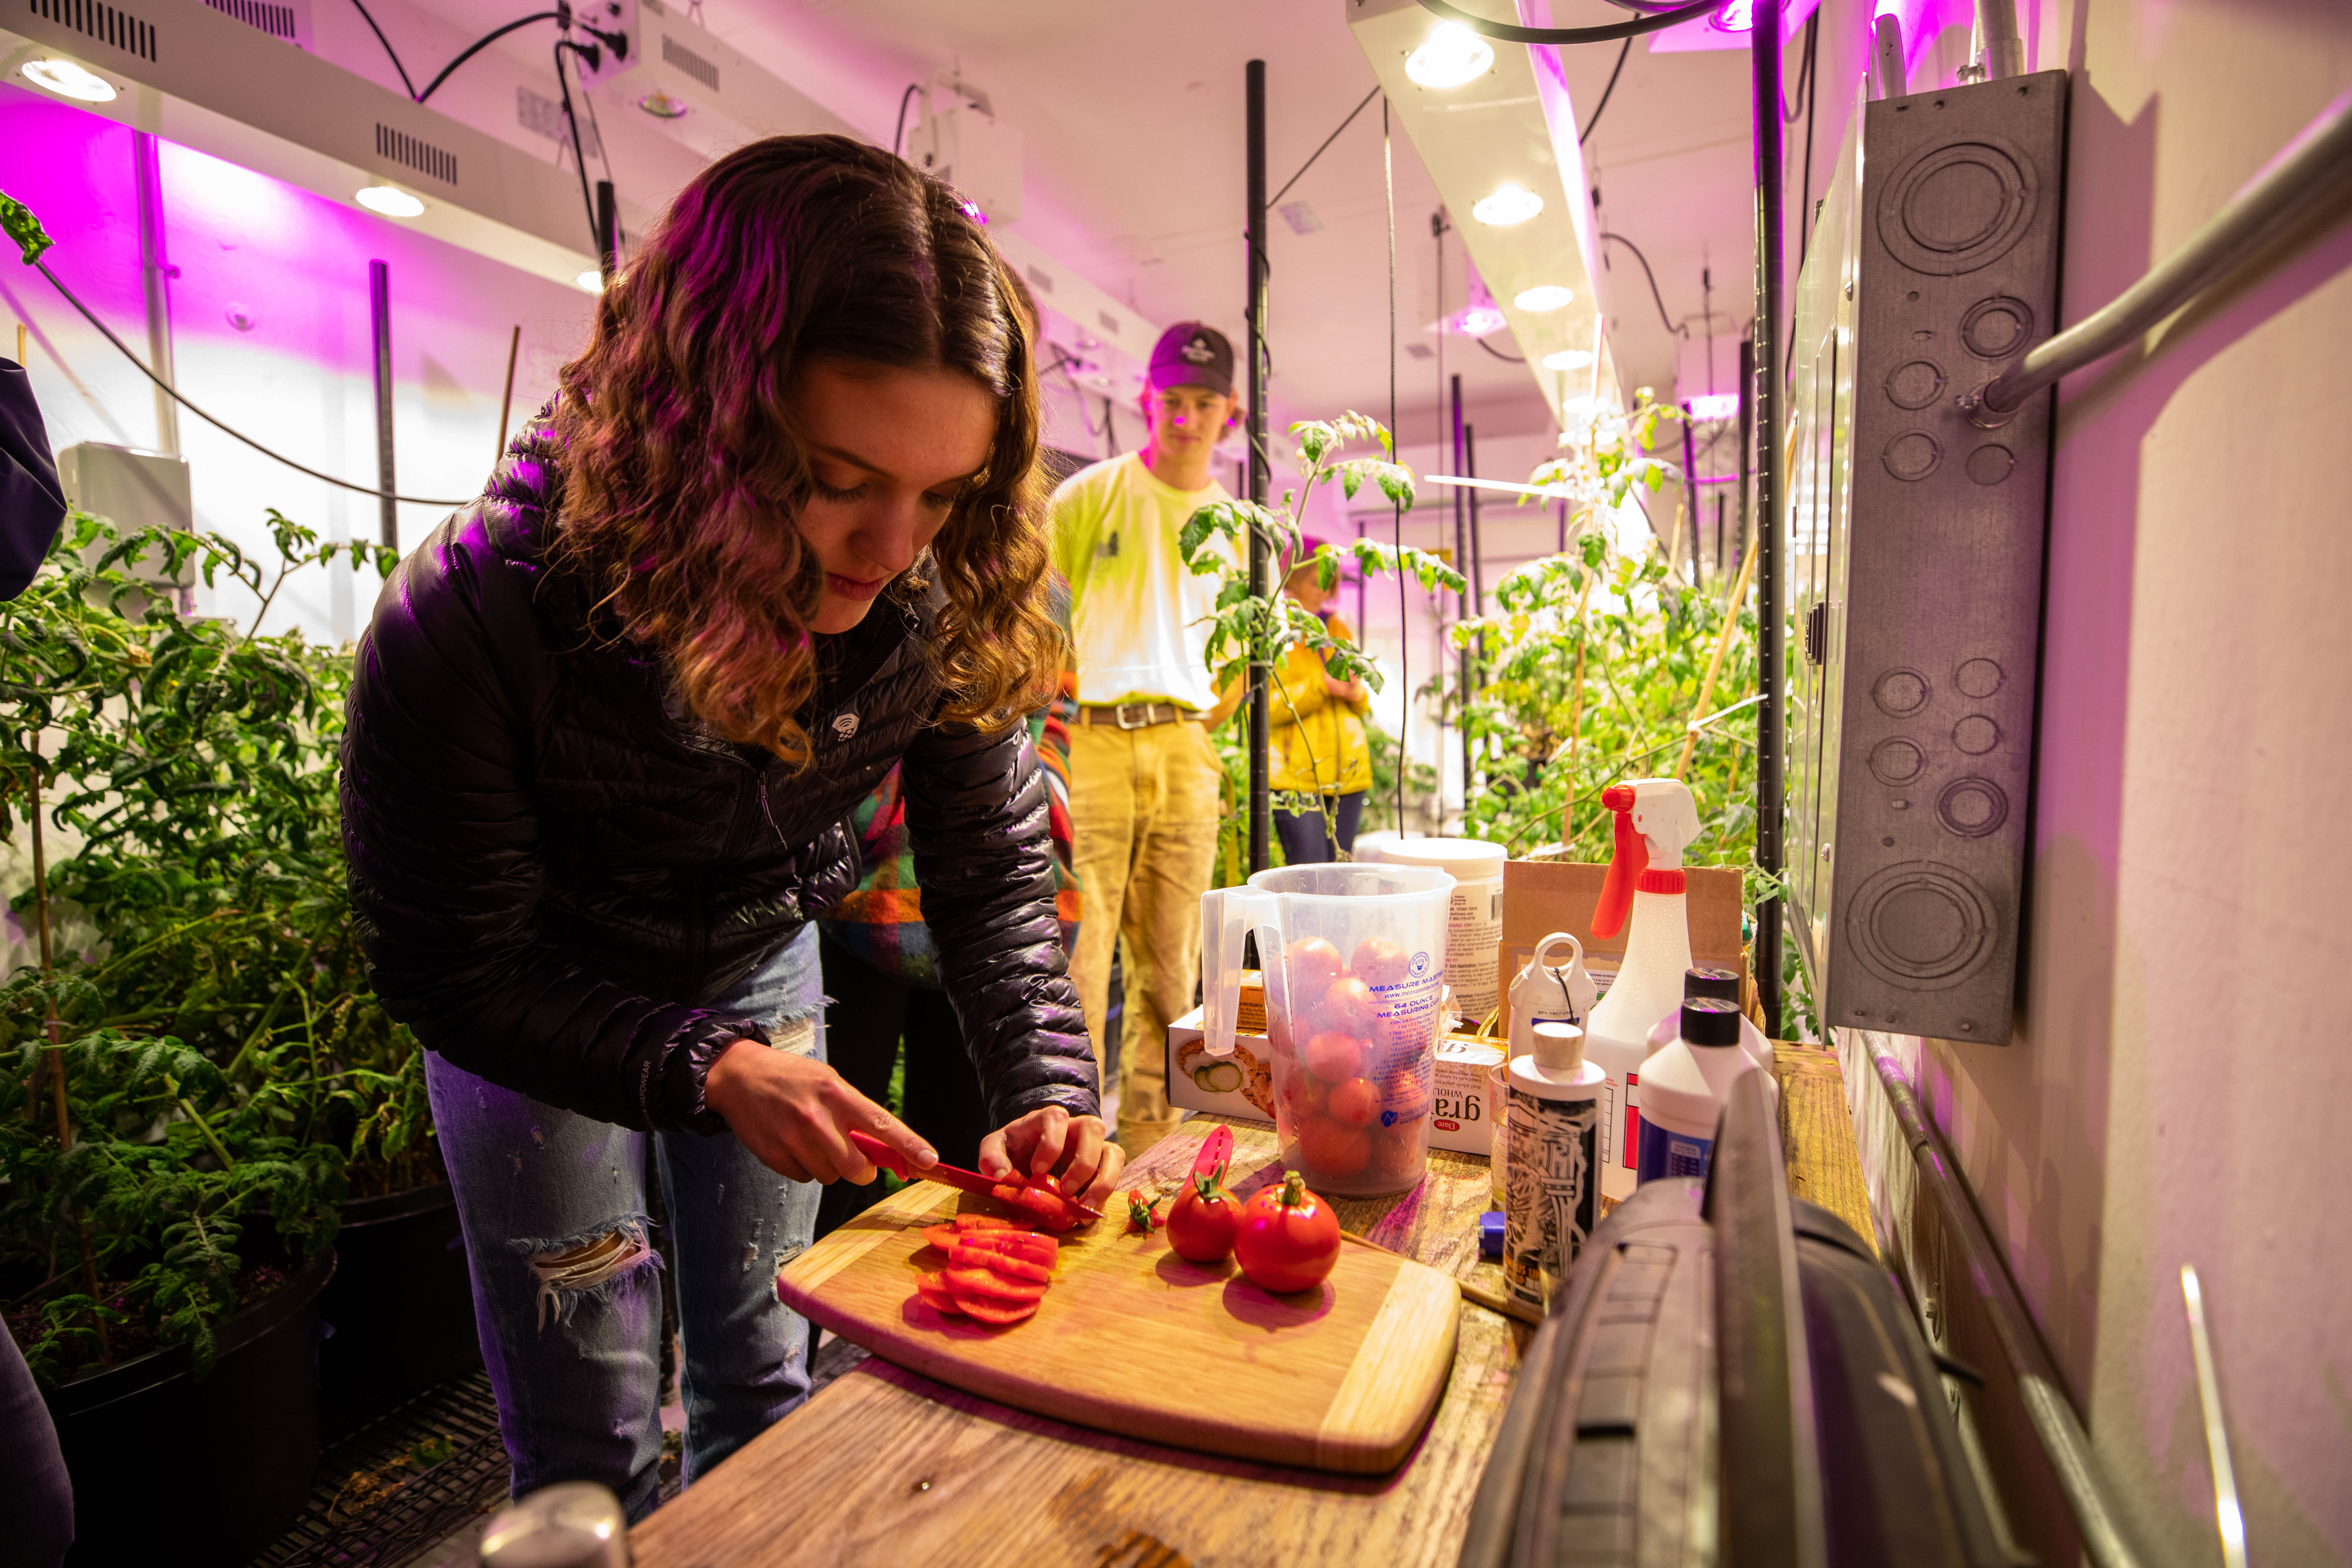 Students harvest ripe tomatoes from the Grow Pod, a project from the Office of Sustainability, on Friday, Jan. 11, 2019, at the University of Oregon in Eugene, Oregon.